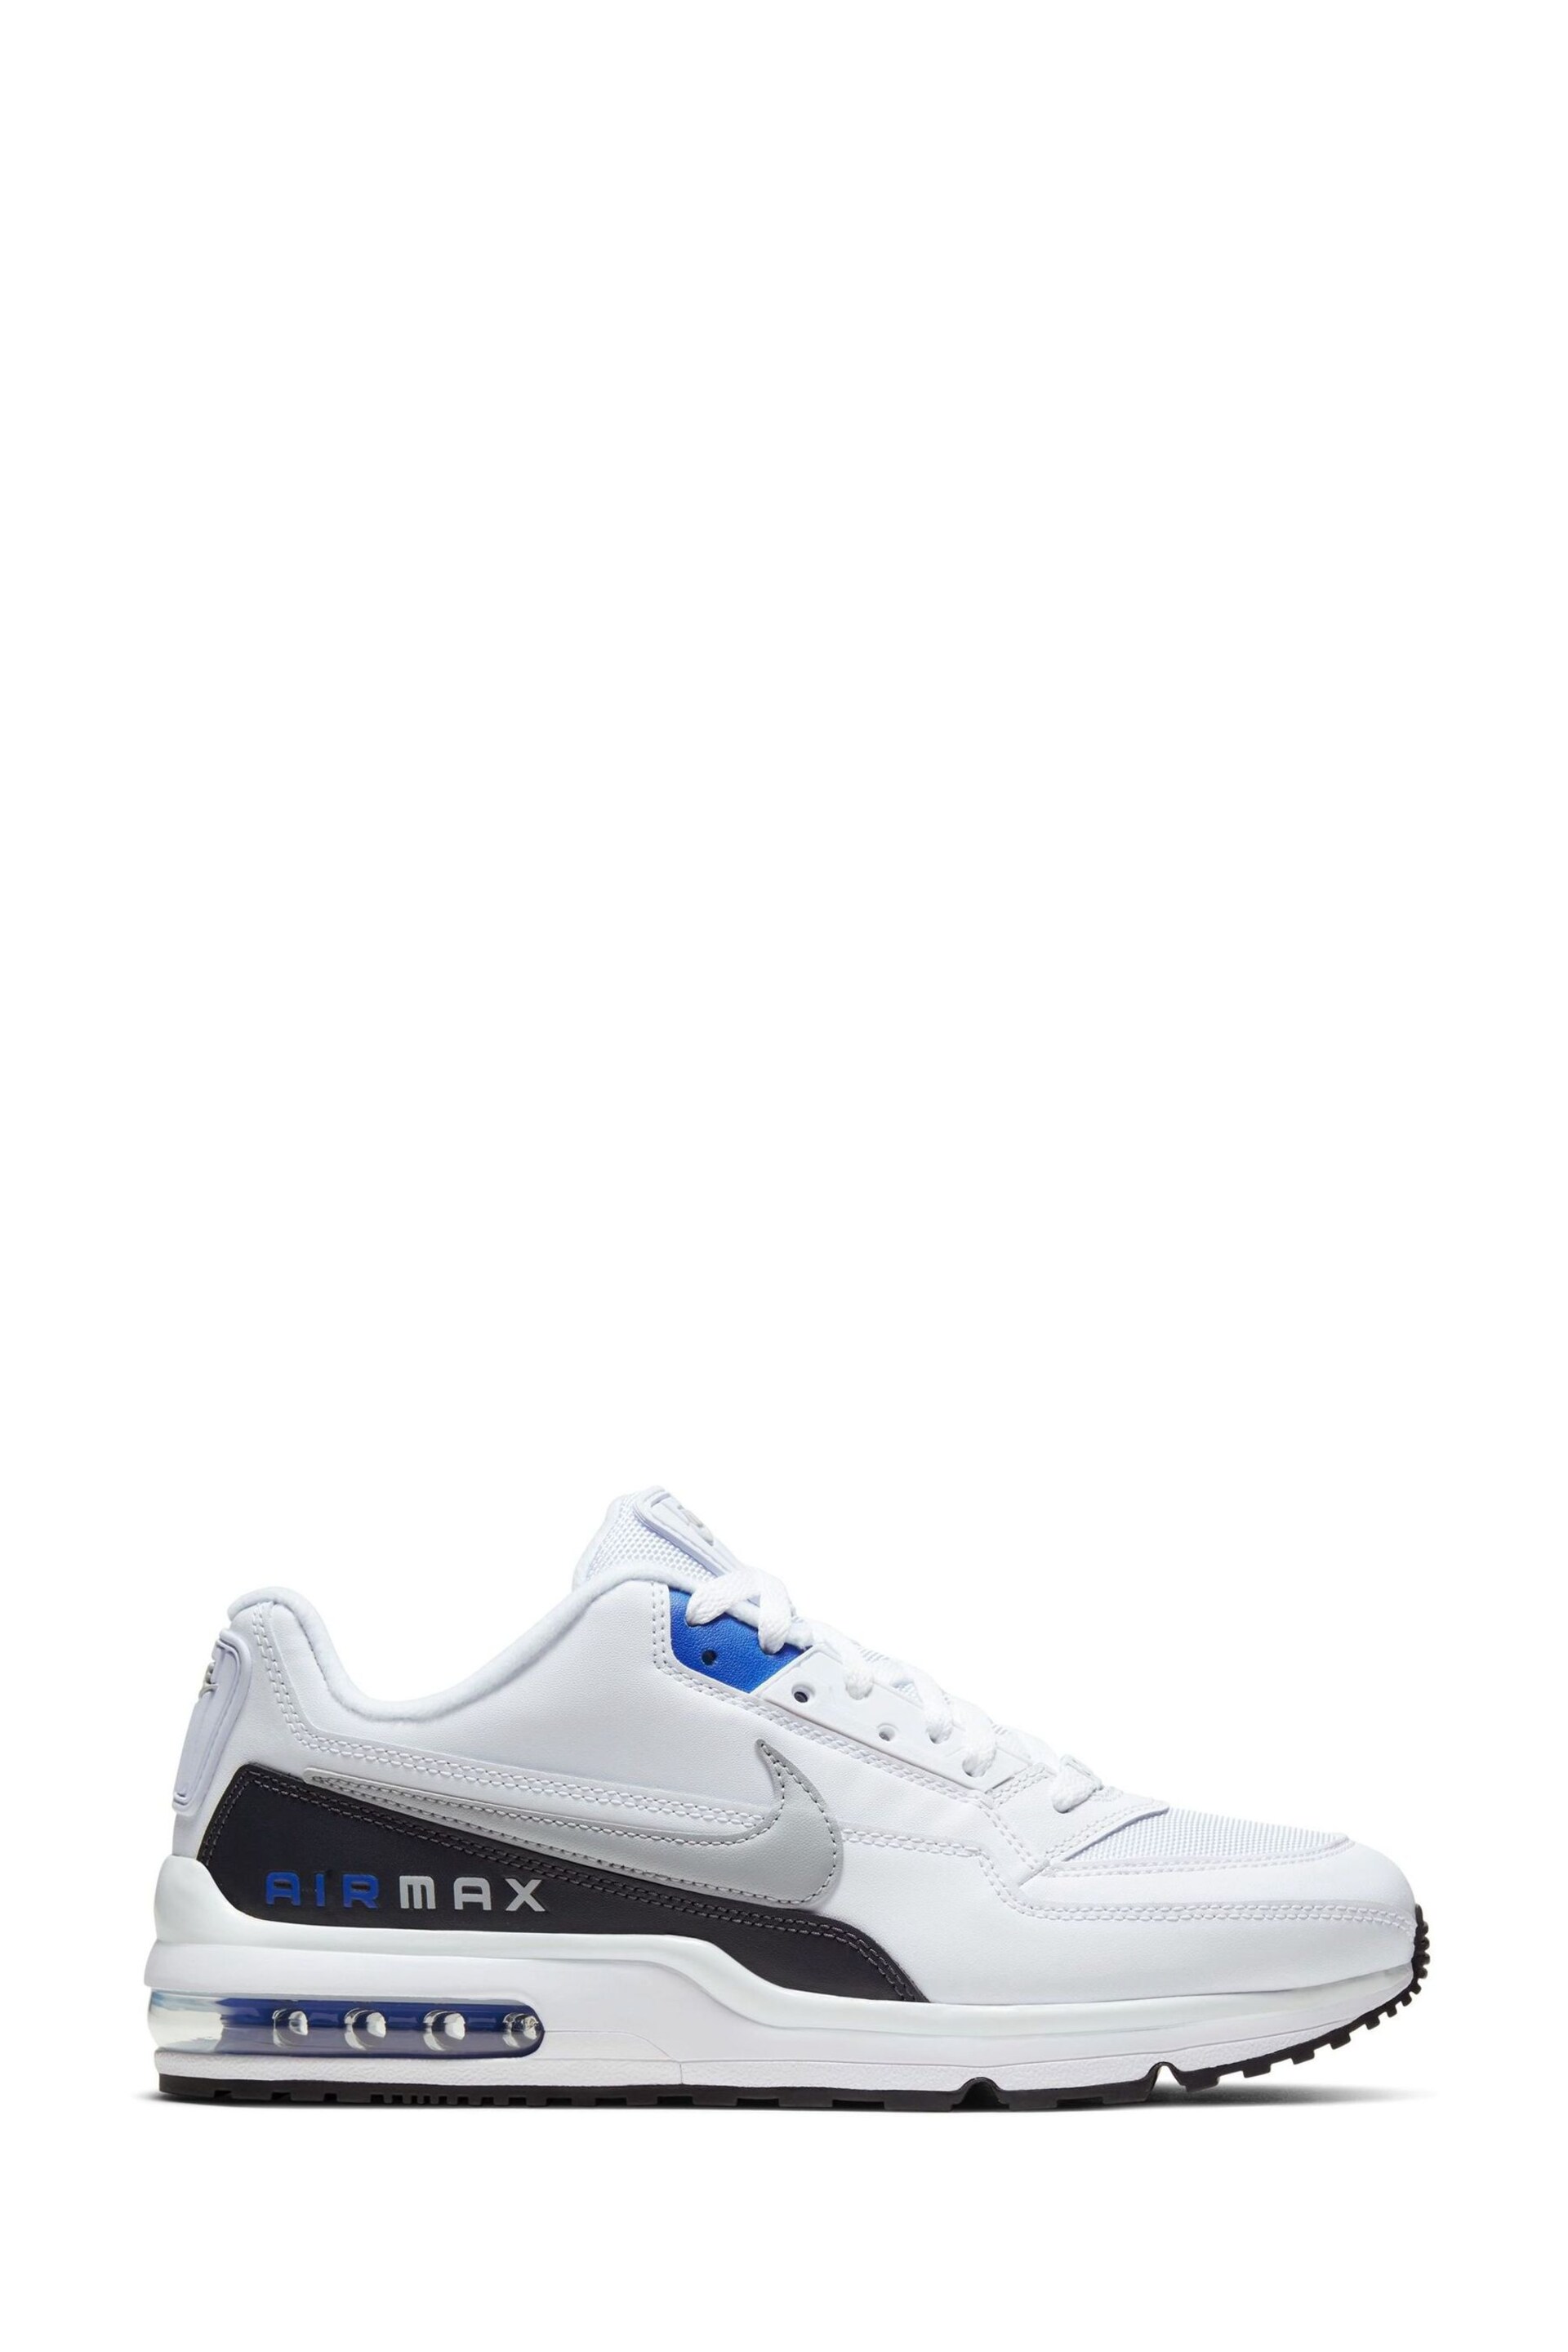 Nike White/Blue Air Max LTD 3 Trainers - Image 1 of 8